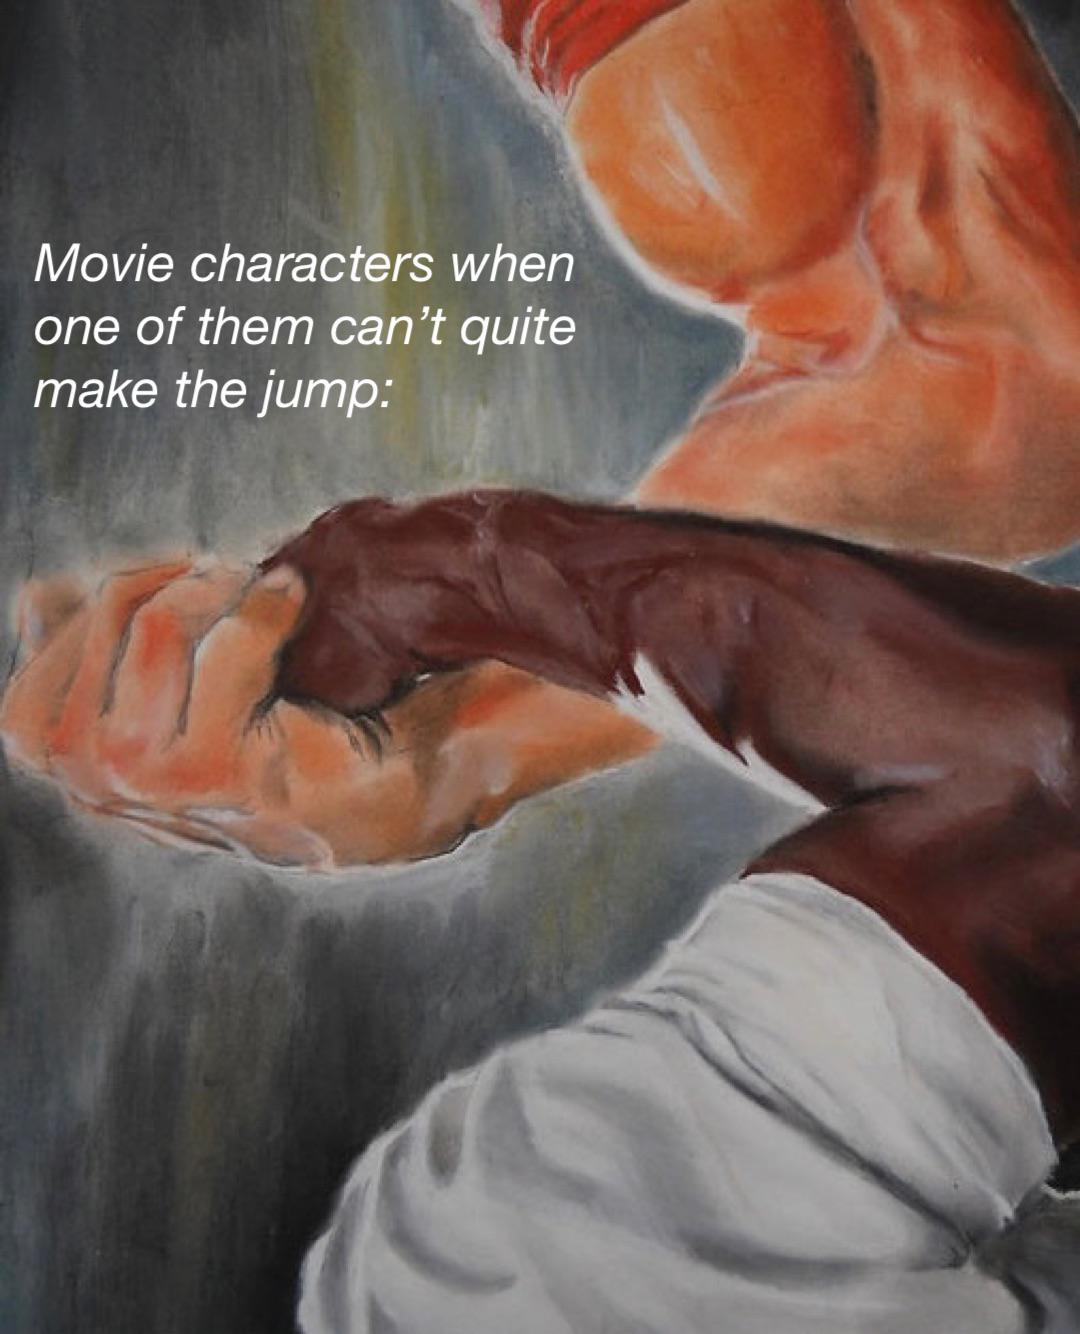 dank memes and funny pics - painting - Movie characters when one of them can't quite make the jump